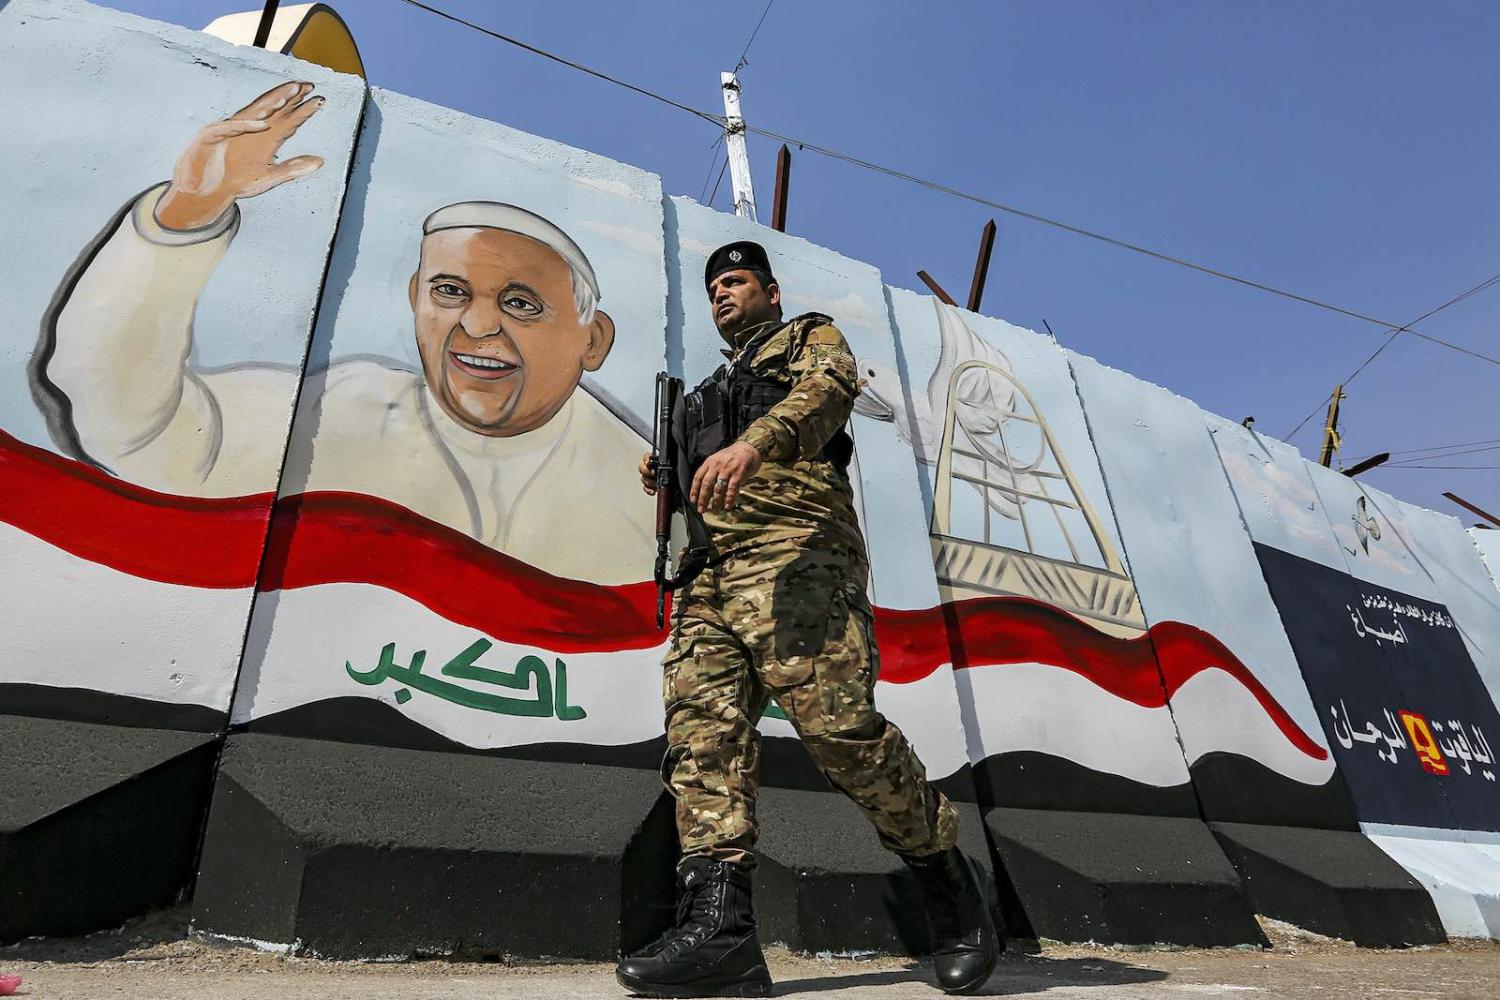  A mural depicting Pope Francis drawn on a blast wall outside the Syriac Catholic Church of Our Lady of Deliverance in the Karrada district of Iraq’s capital Baghdad, 1 March (Sabah Arar/AFP via Getty Images)